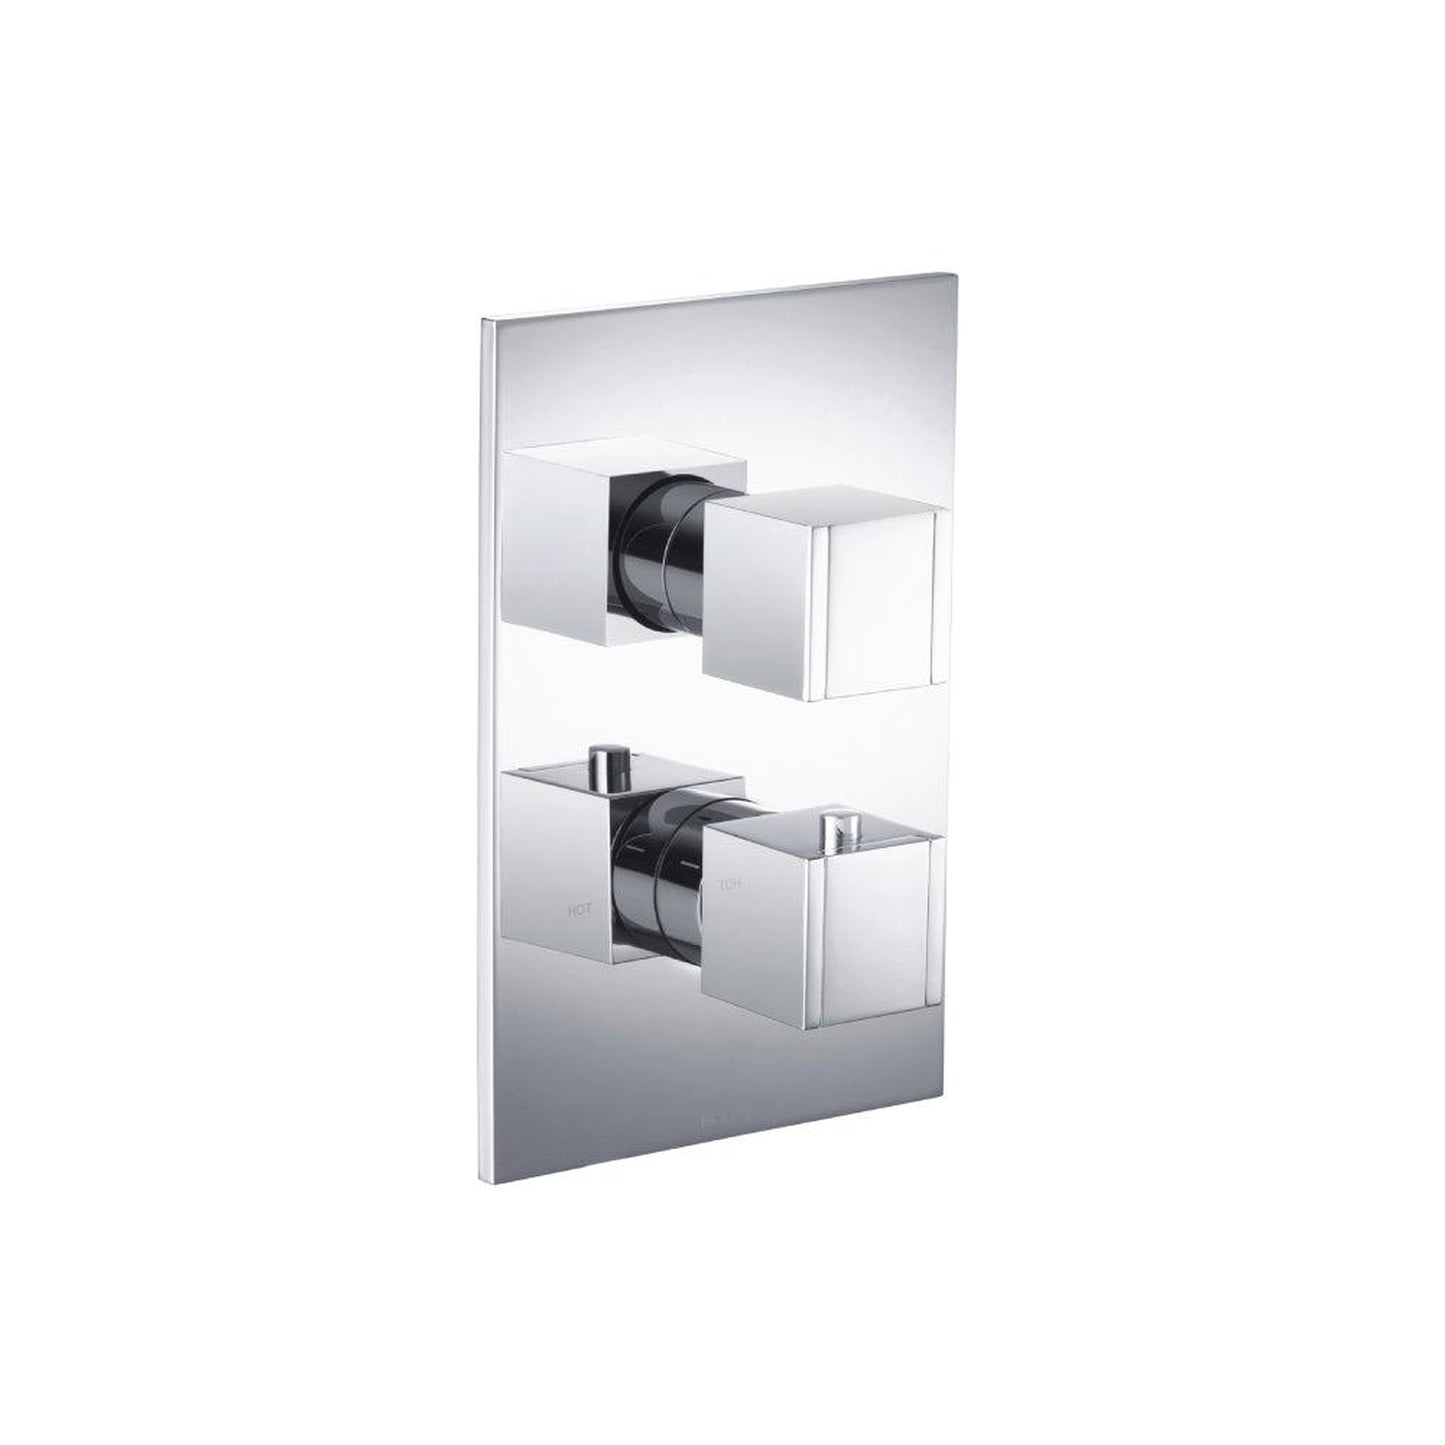 Isenberg Serie 150 Three Output Trim for Thermostatic Valve in Chrome